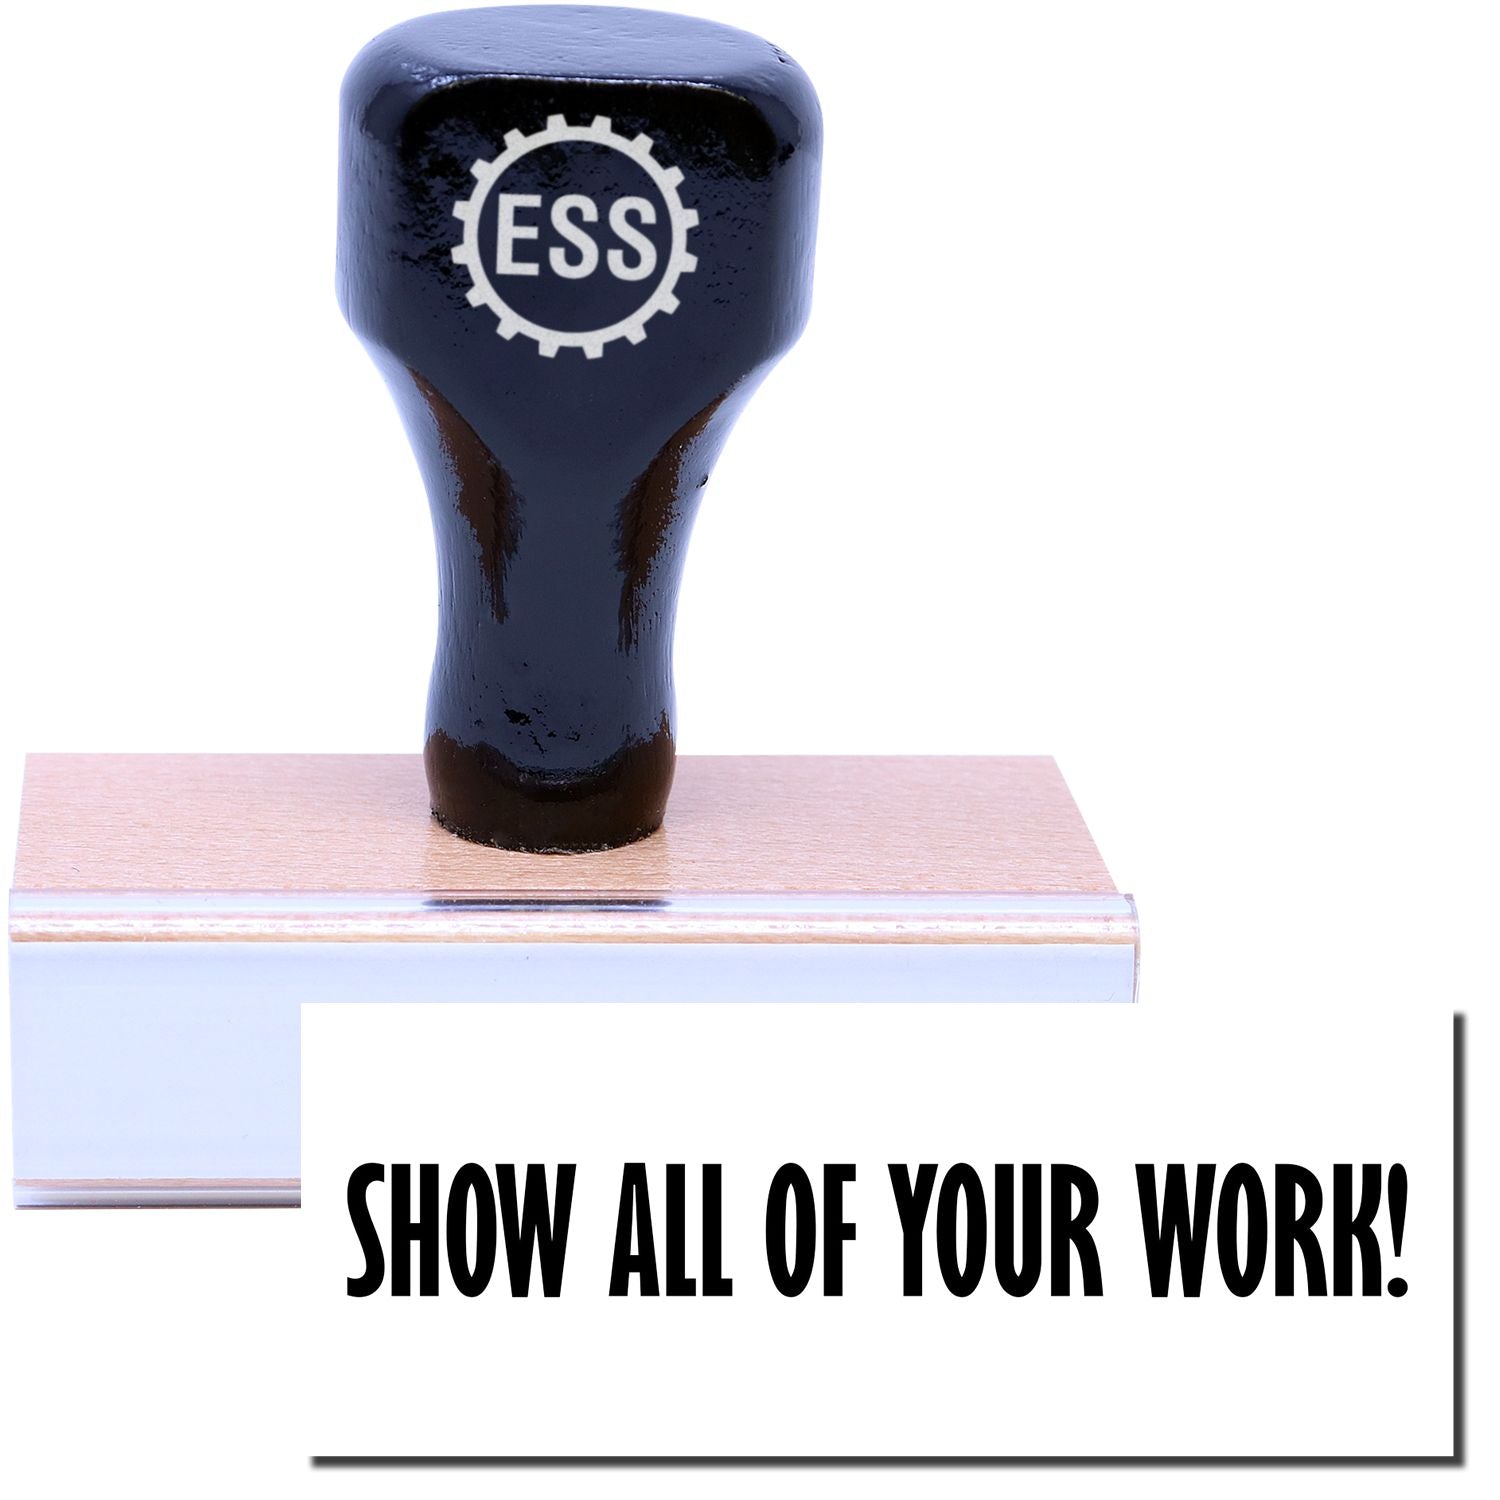 A stock office rubber stamp with a stamped image showing how the text "SHOW ALL OF YOUR WORK!" in a large font is displayed after stamping.